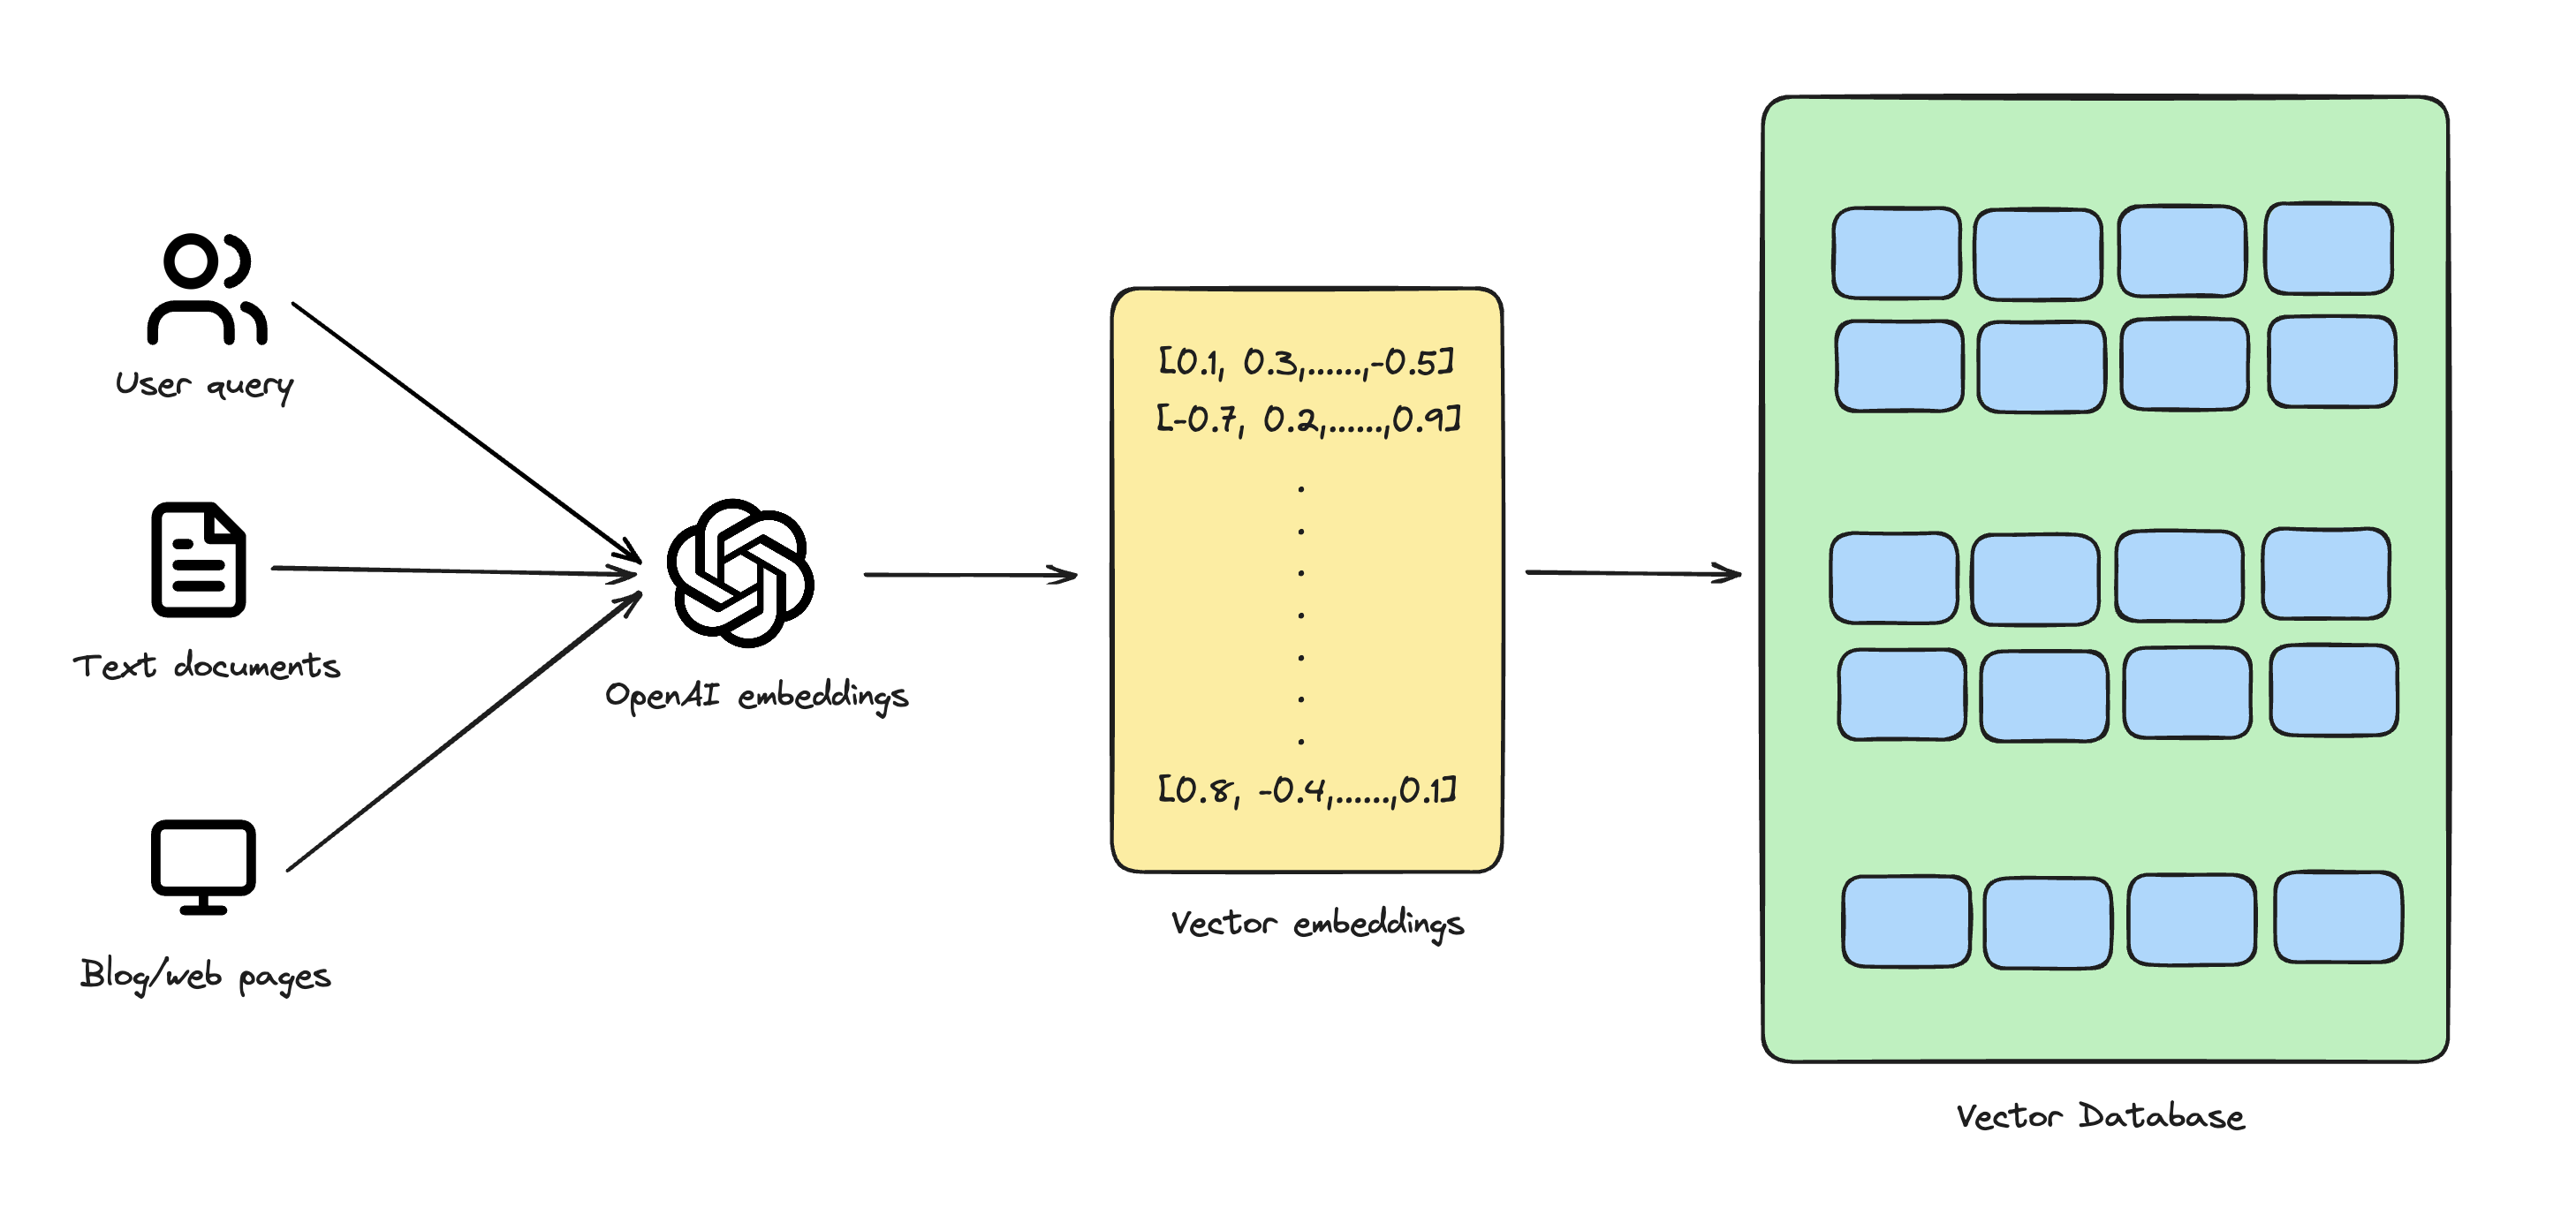 A diagram showing how vector databases work: user query, text documents, and web pages are converted to Vector embeddings using OpenAI embeddings and stored in Vector databases.